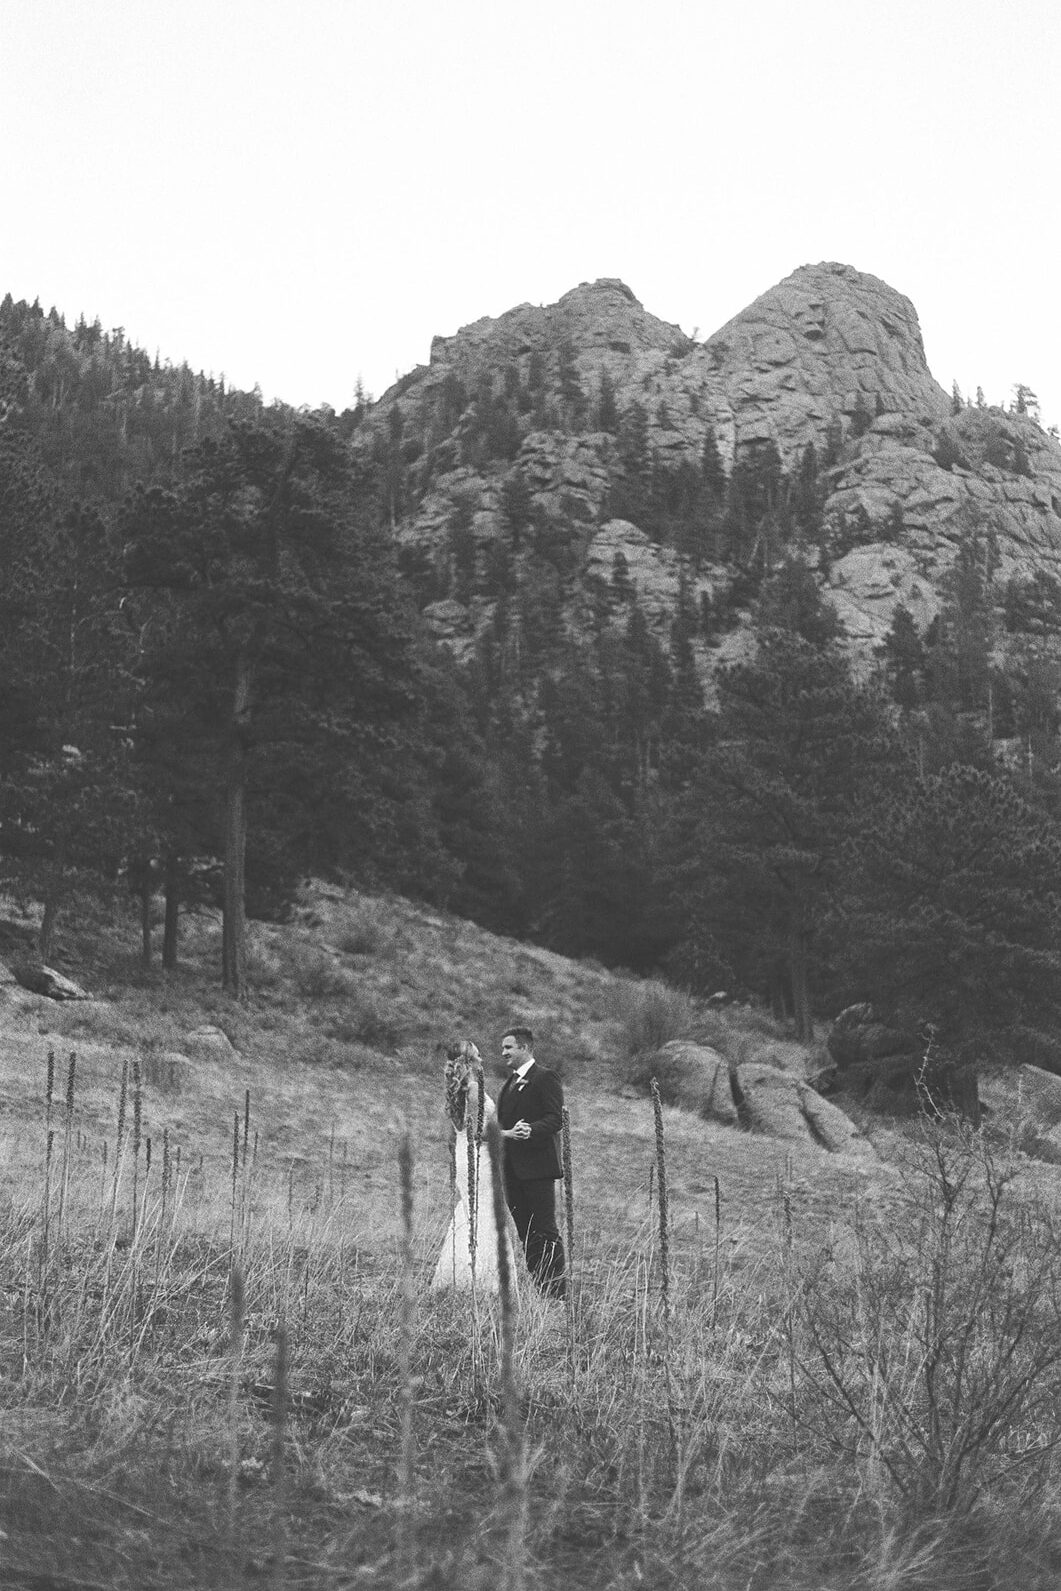 Bride and groom stand in a field with mountains rising up in the background for their film wedding photos